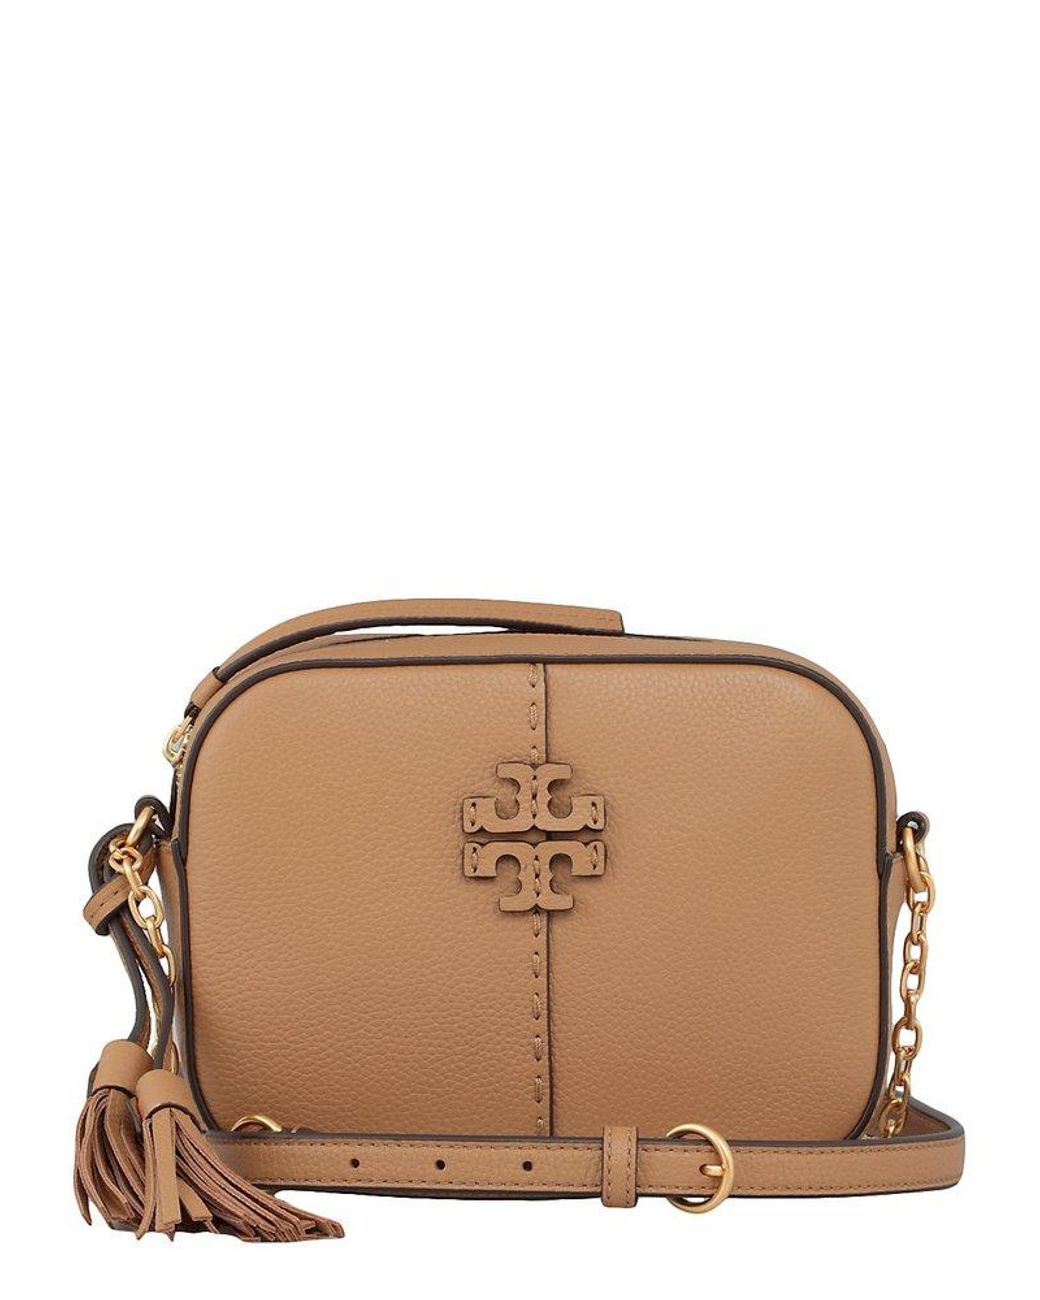 Tory Burch Leather Mcgraw Crossbody Bag in Brown | Lyst